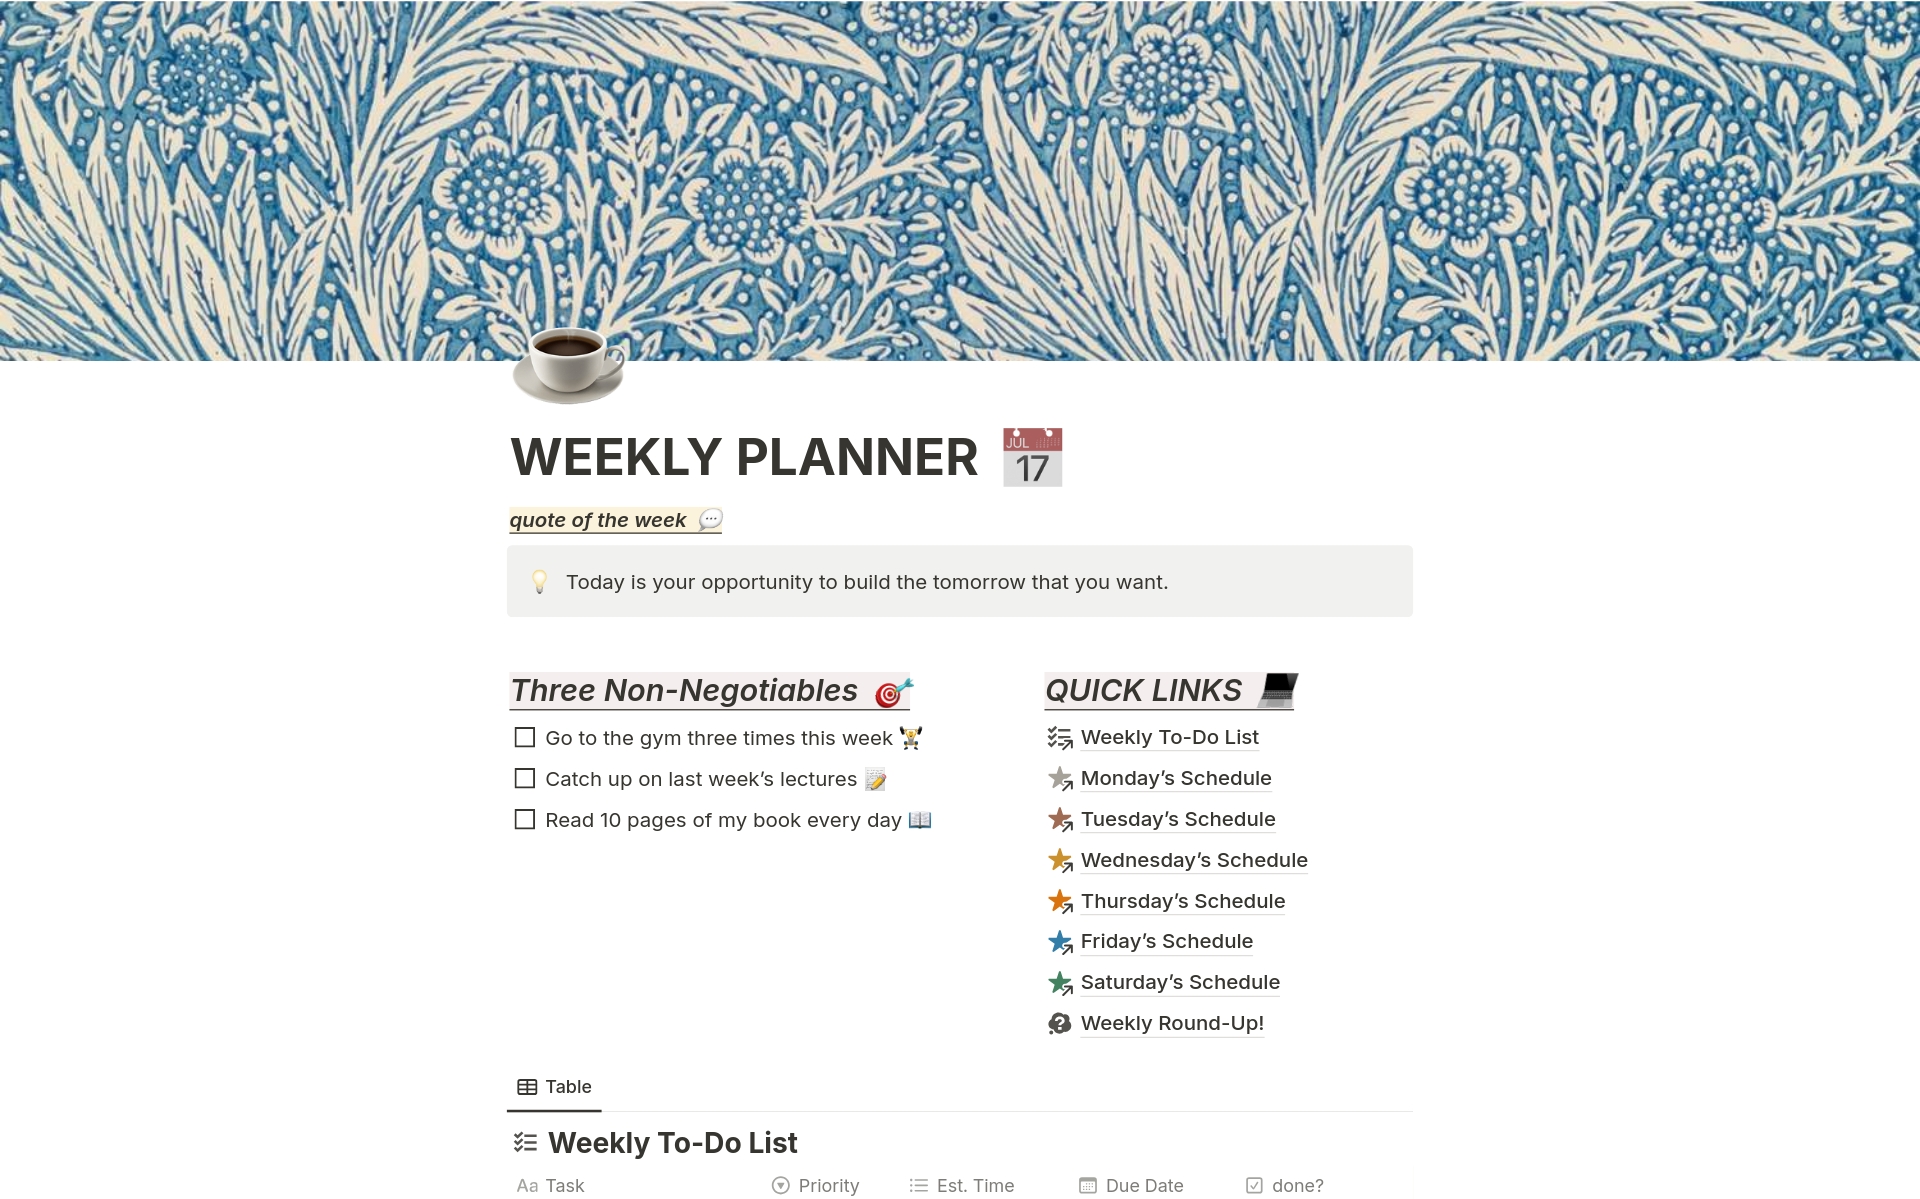 Level up your productivity game with this weekly planner! 📈 Includes a master to-do list to brain-dump everything you need to do that week, alongside Mon-Sun daily schedules for you to allocate your tasks between days. Reflect on your progress at the end of the week! 🤔